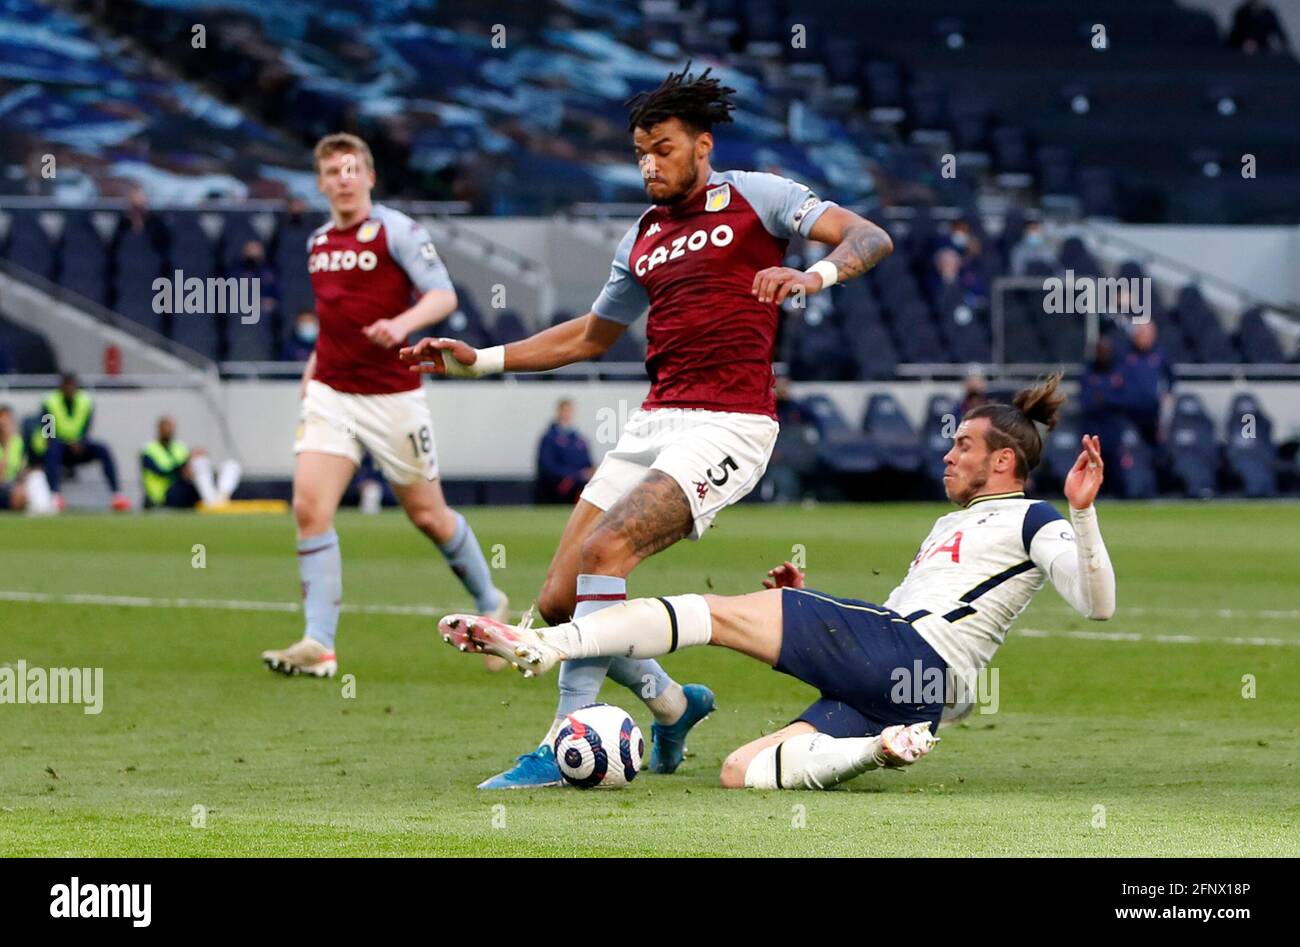 Tottenham Hotspur's Gareth Bale (right) challenges Aston Villa's Tyrone Mings during the Premier League match at the Tottenham Hotspur Stadium, London. Picture date: Wednesday May 19, 2021. Stock Photo